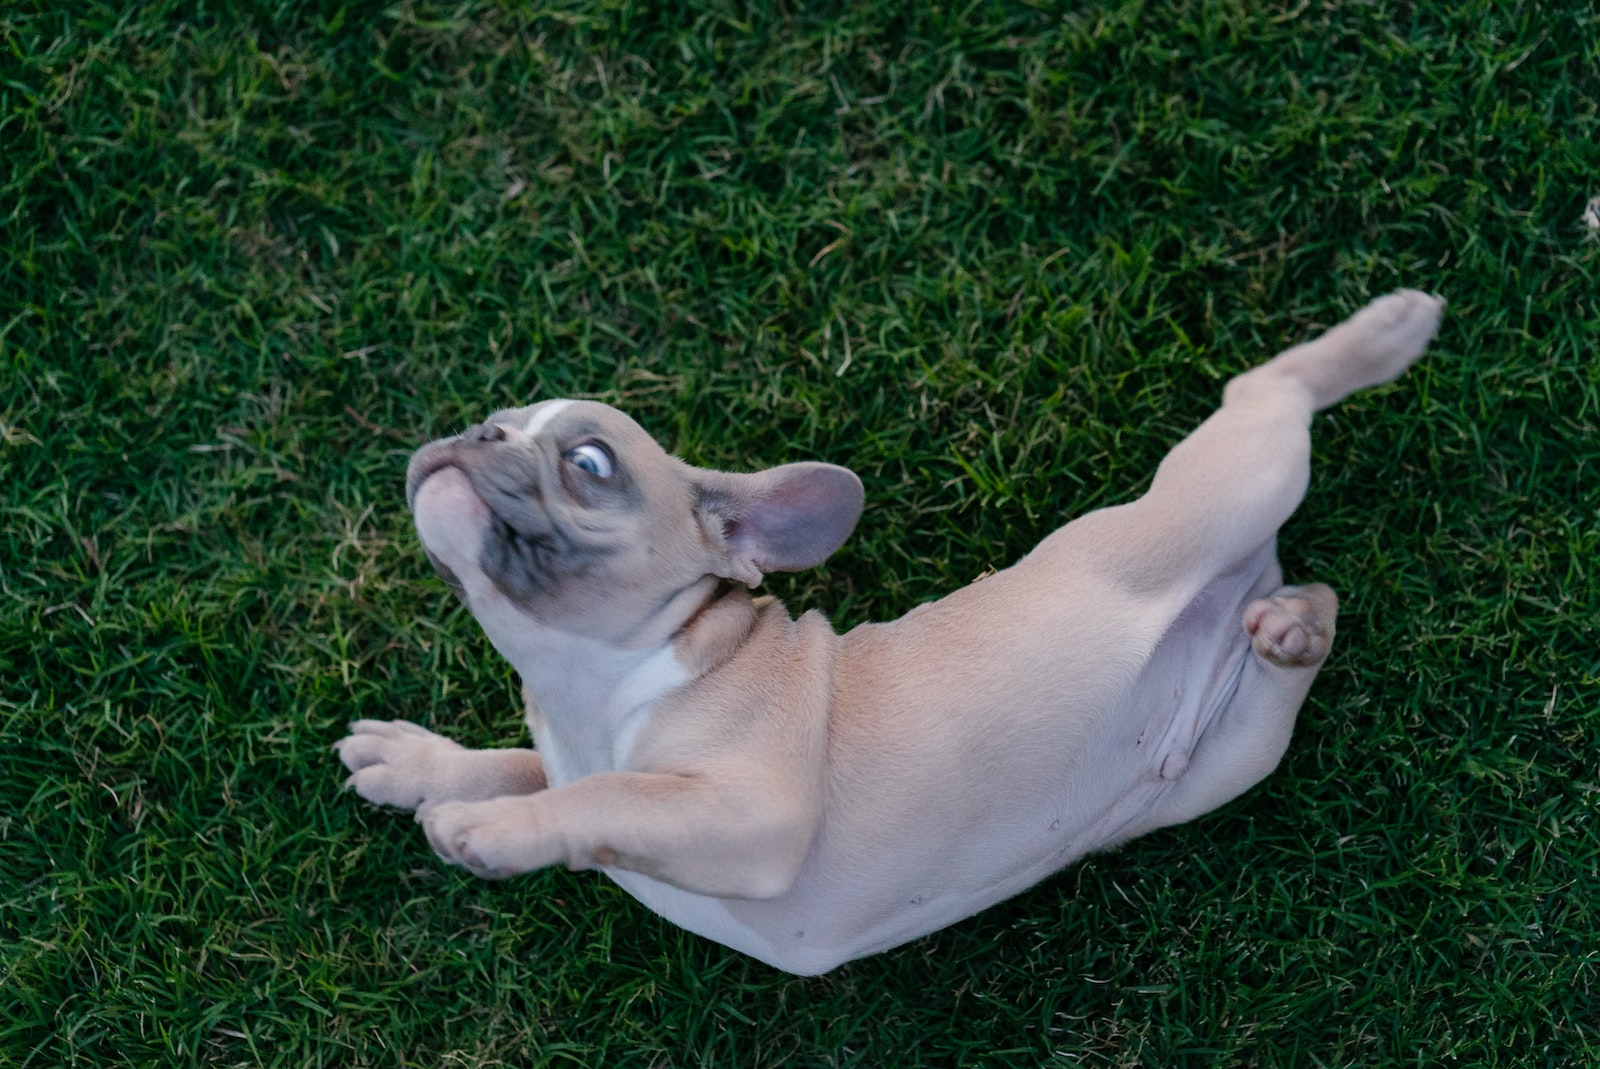 Can French Bulldogs Eat Apples Safely?